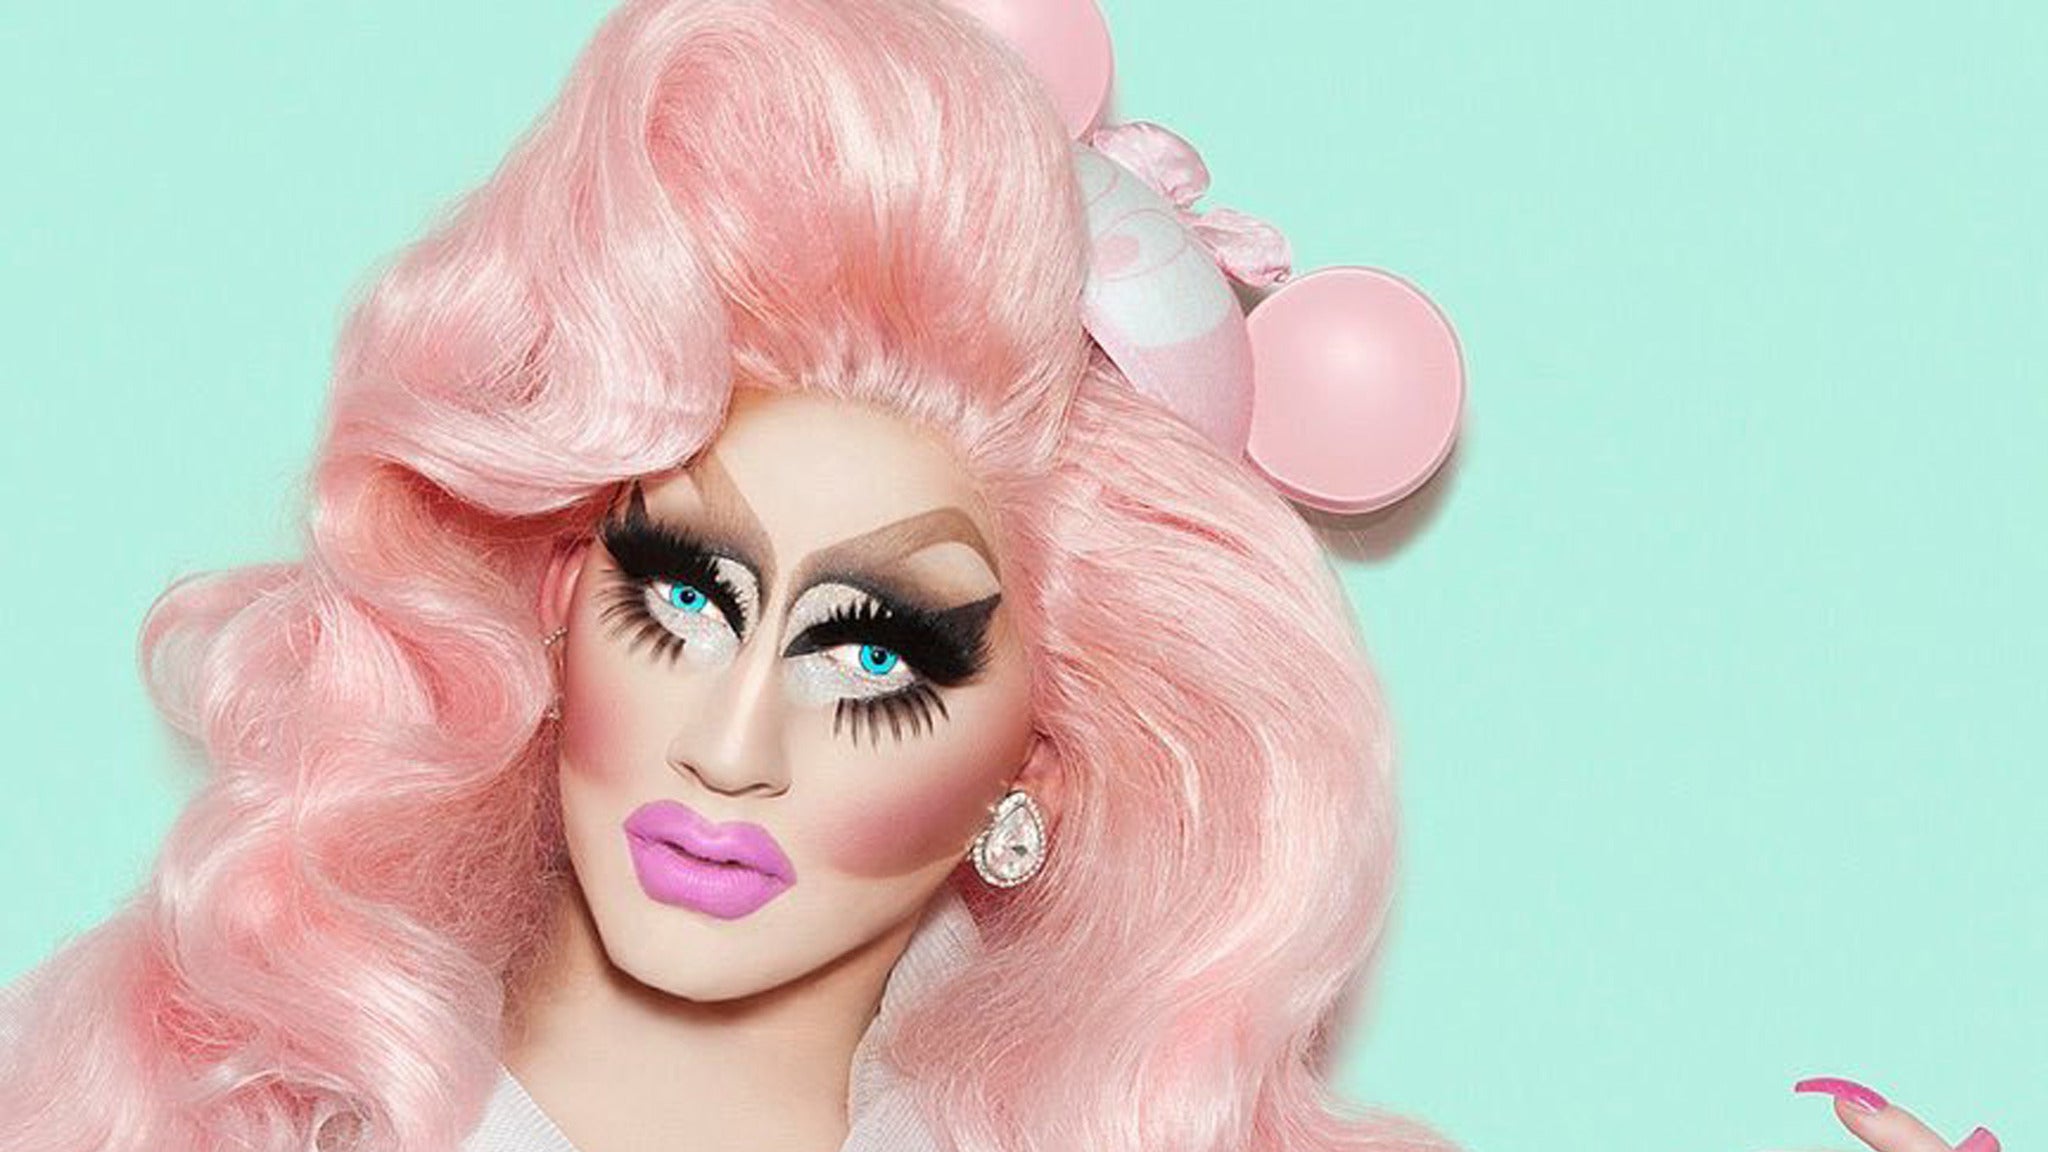 Trixie Mattel: Grown Up in Portland promo photo for VIP Package Onsale presale offer code